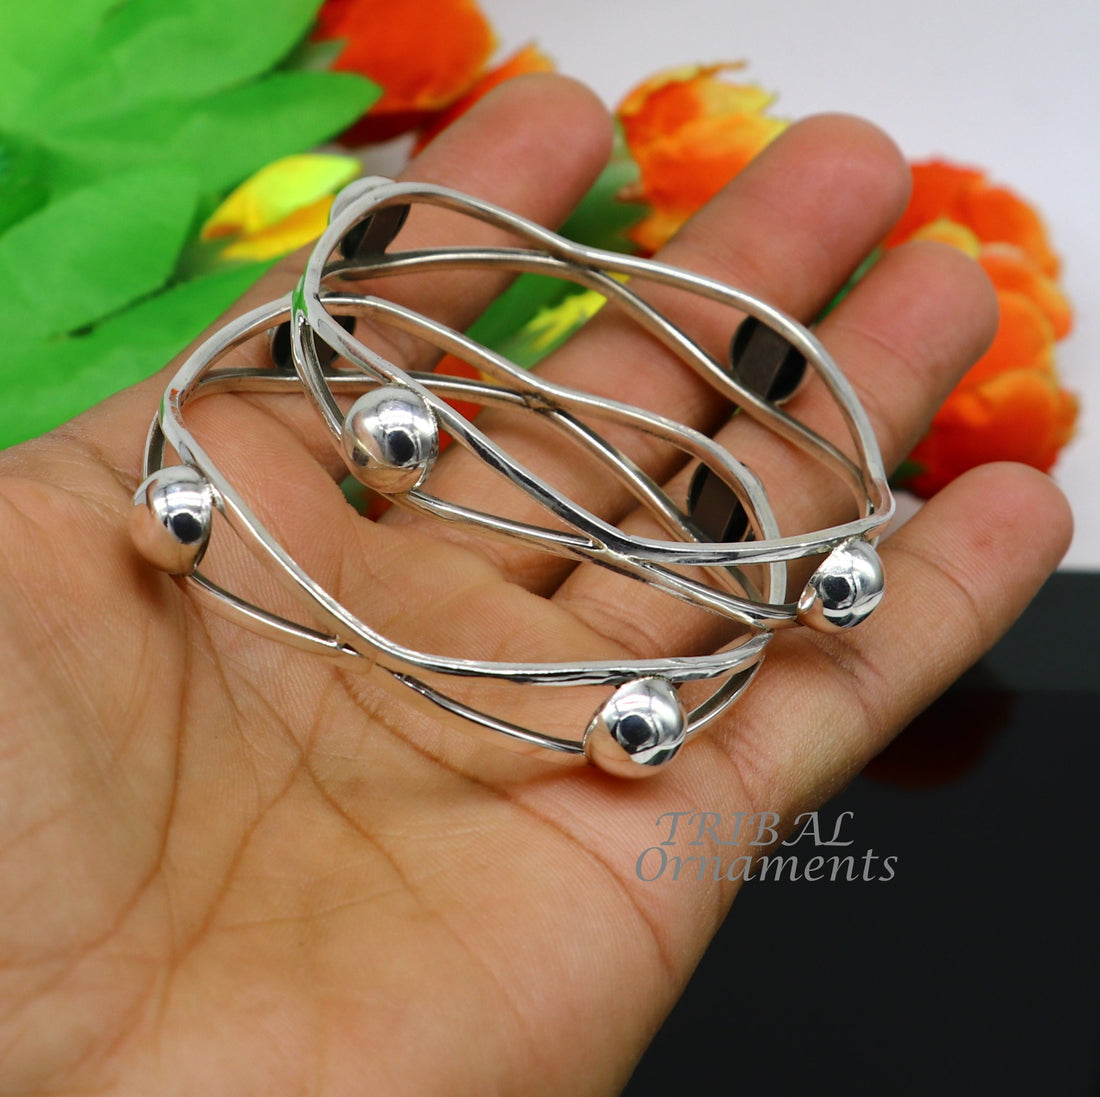 925 sterling silver flower design unique style handmade bangle bracelet, best brides collection wedding jewelry from india nba343 - TRIBAL ORNAMENTS